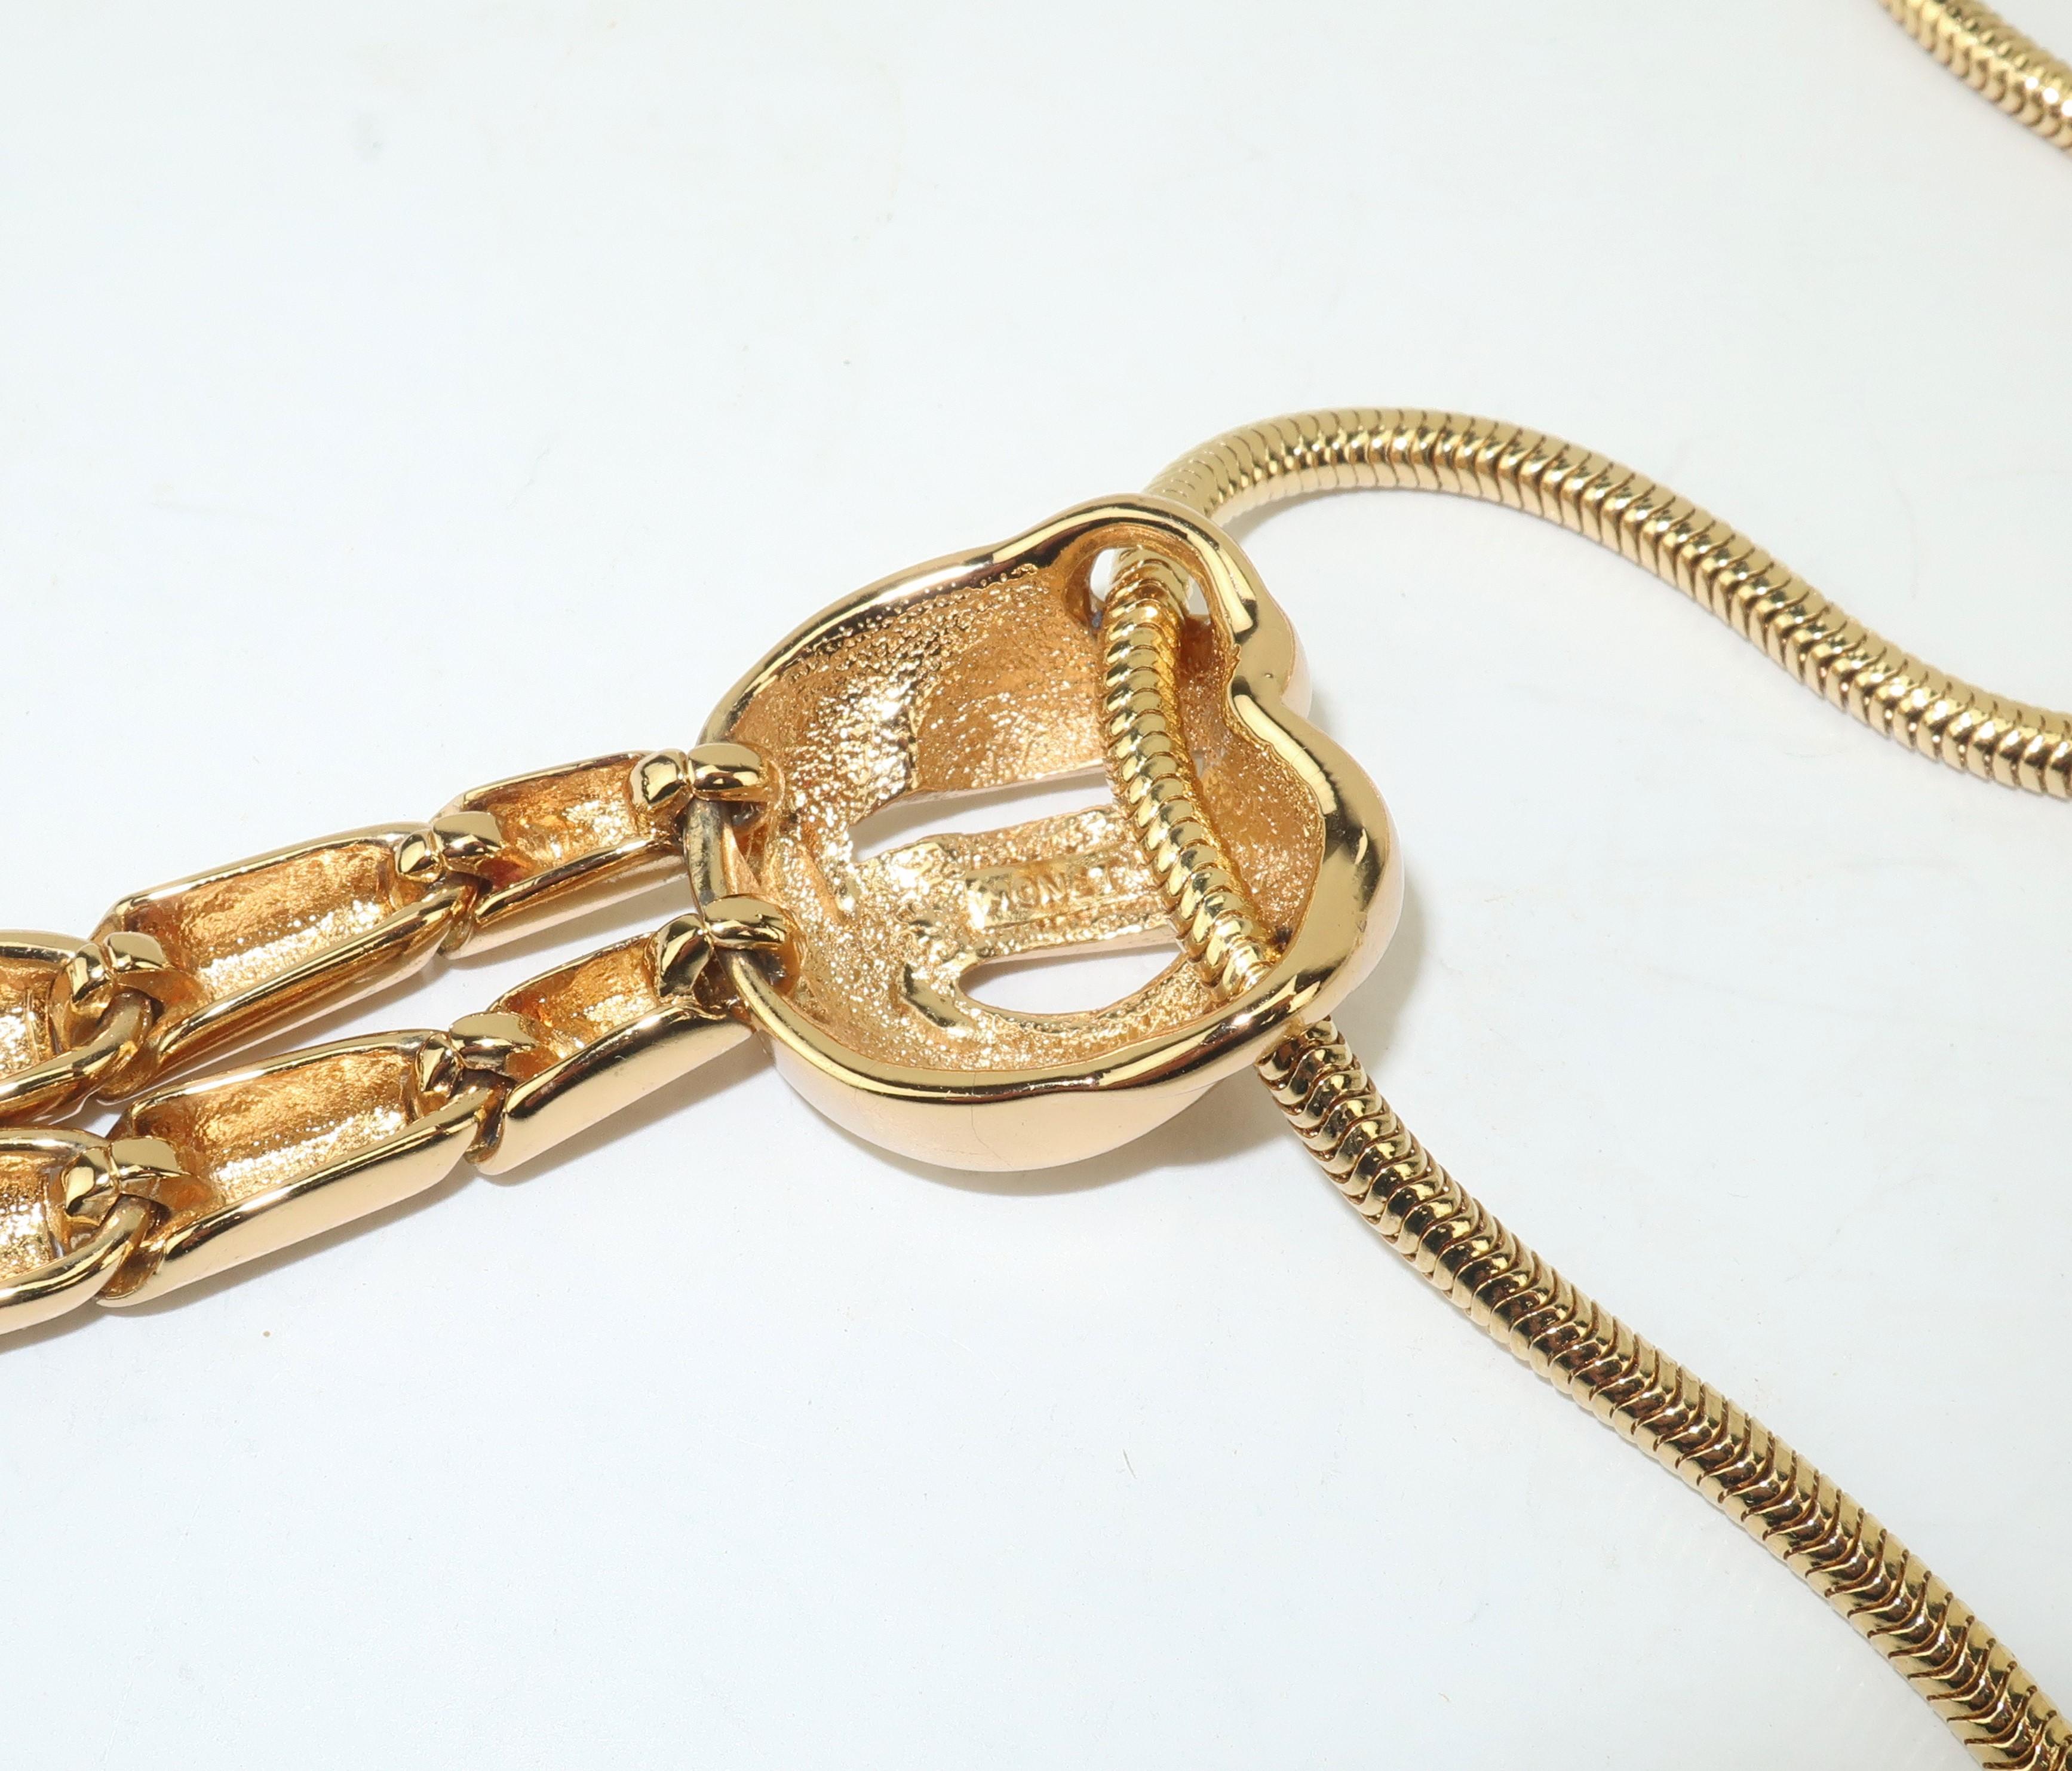 Vintage Monet Gold Tone Articulated Knot Necklace 2